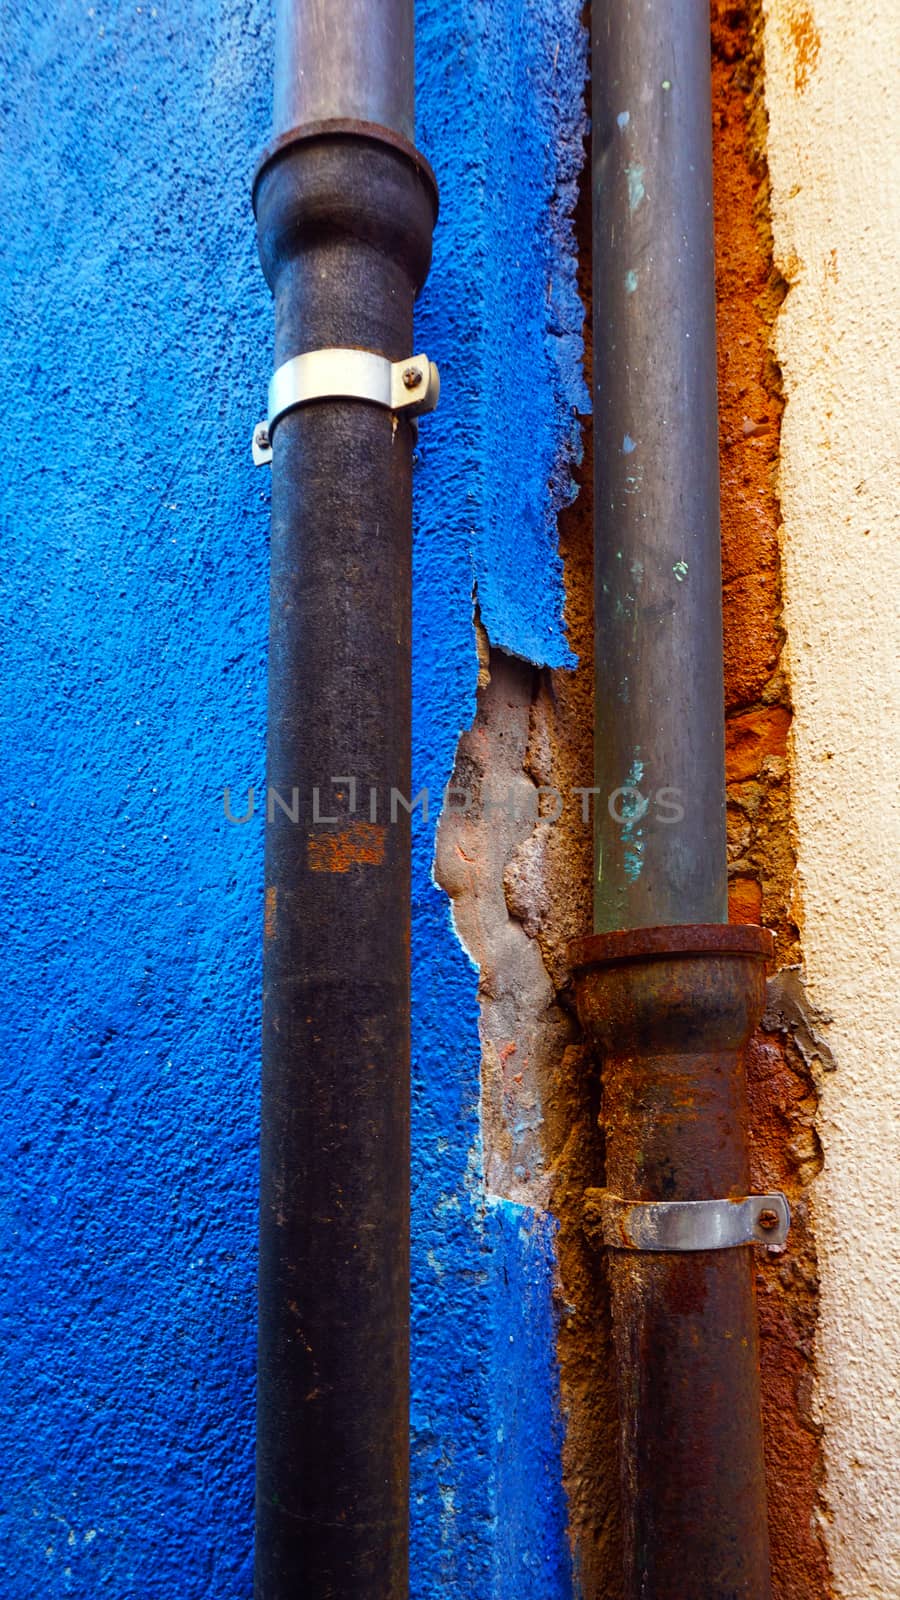 rustic metal pipe on blue color wall in Burano, Venice, Italy